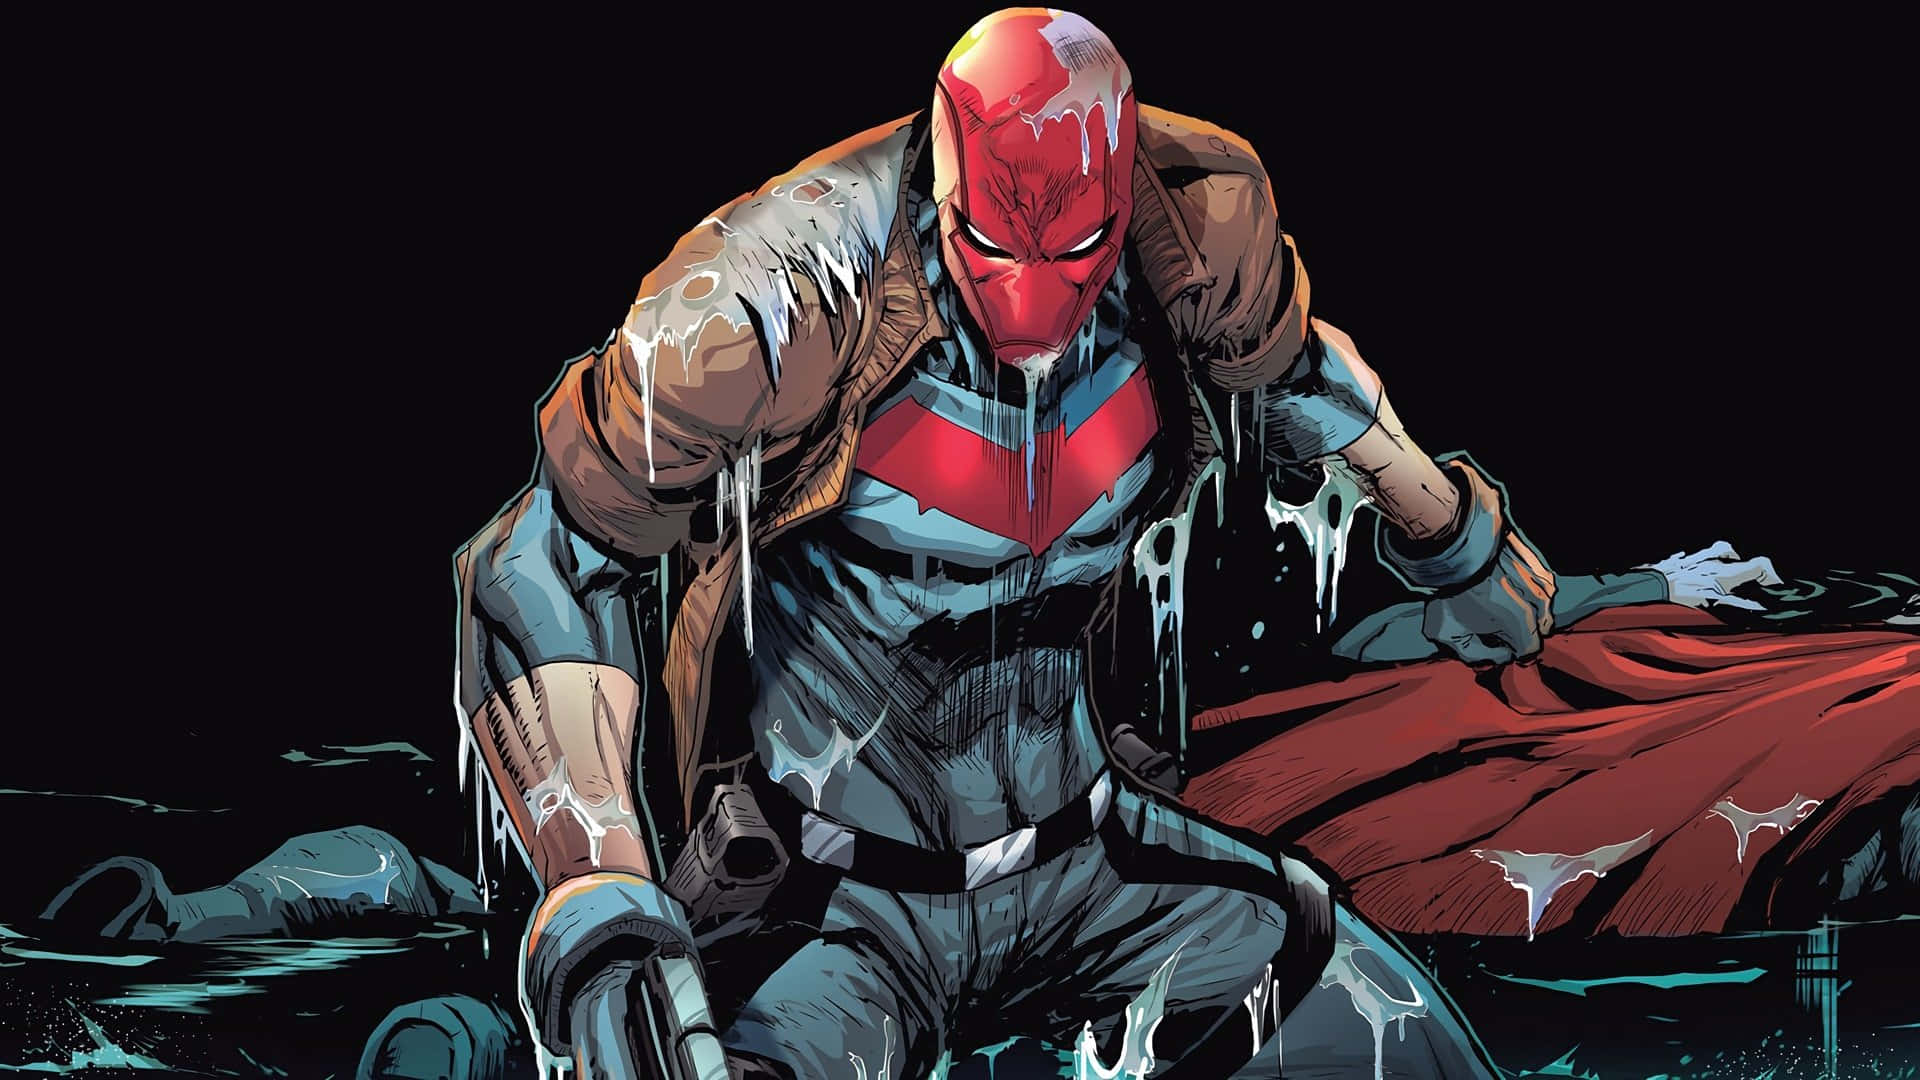 A close-up of the masked vigilante Red Hood